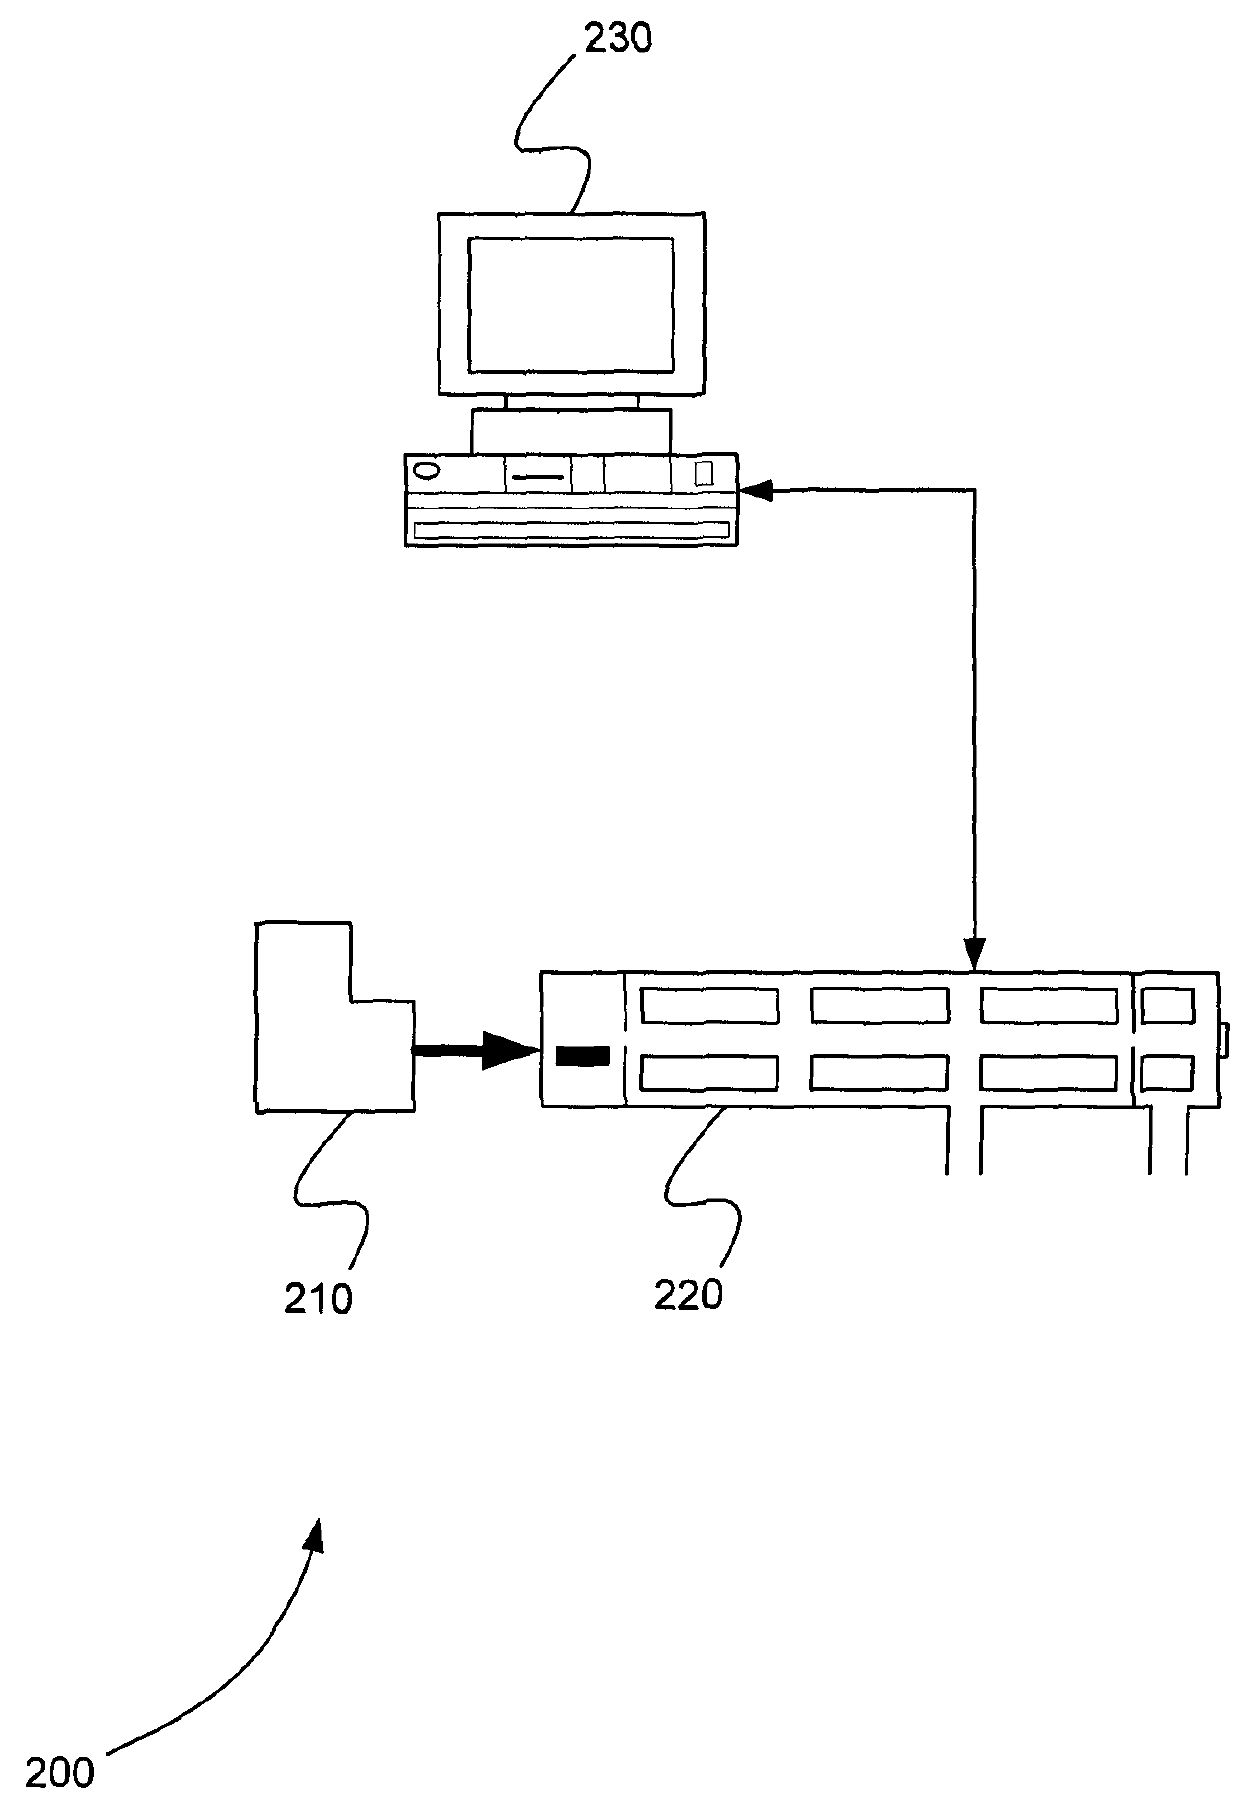 Use of windowed mass spectrometry data for retention time determination or confirmation